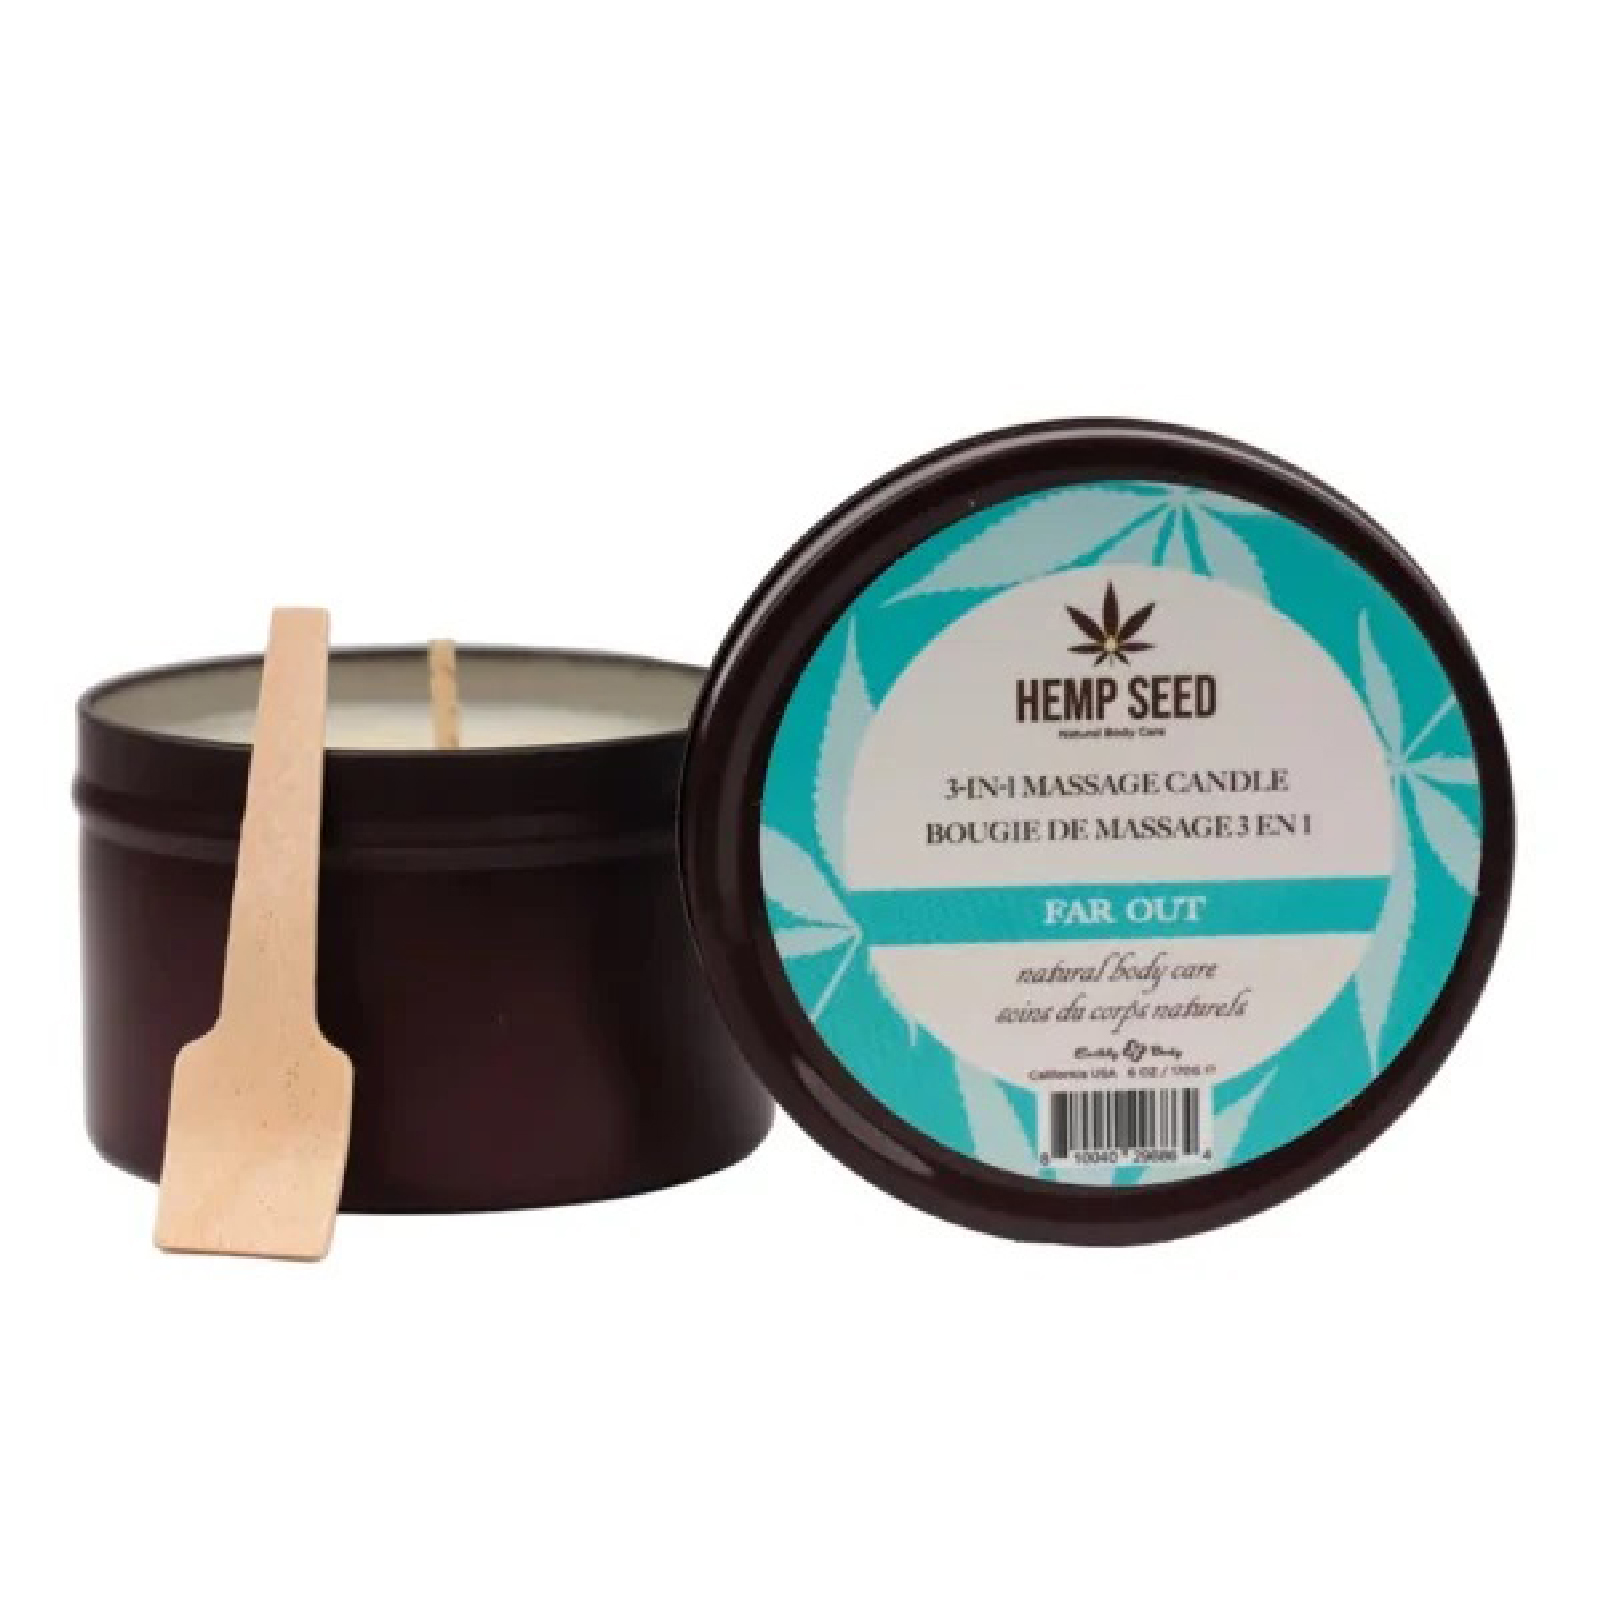 hemp seed  in  massage candle far out  oz 